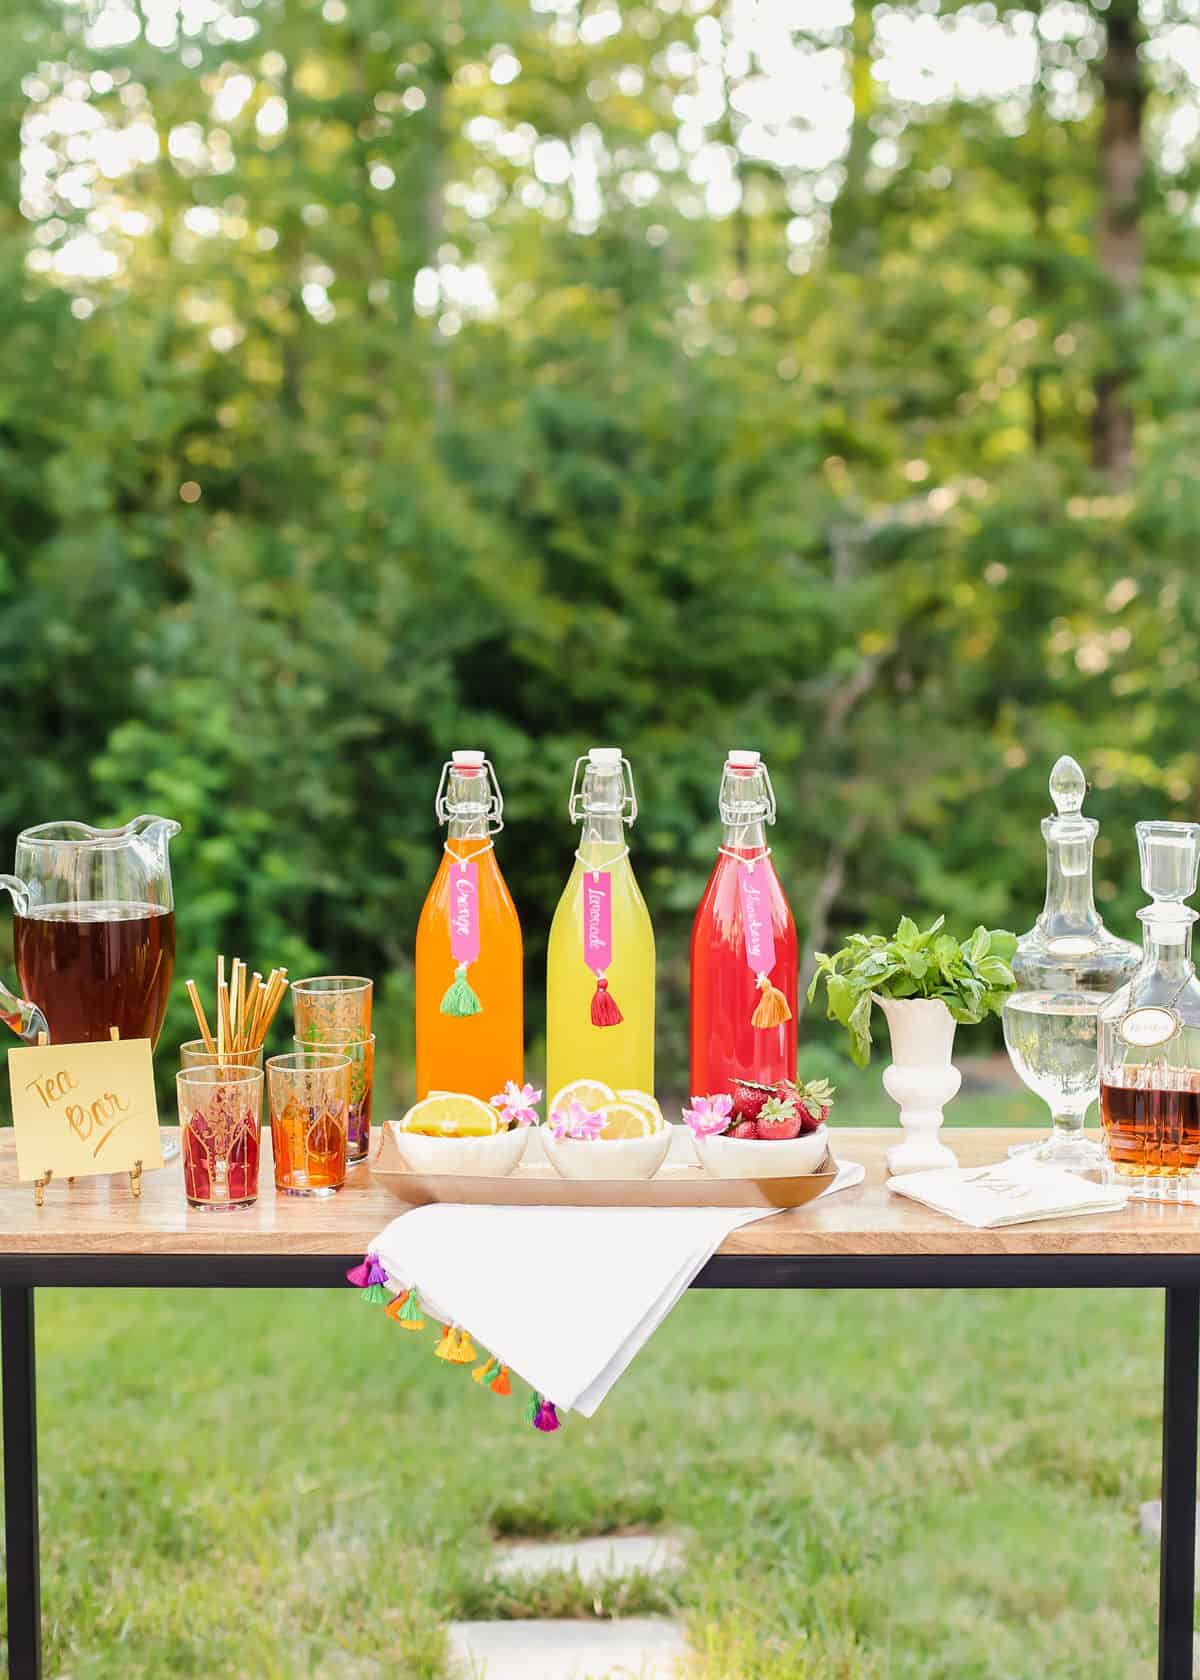 table set up outside with pitcher of iced tea, glasses, juice bottles and decanters.